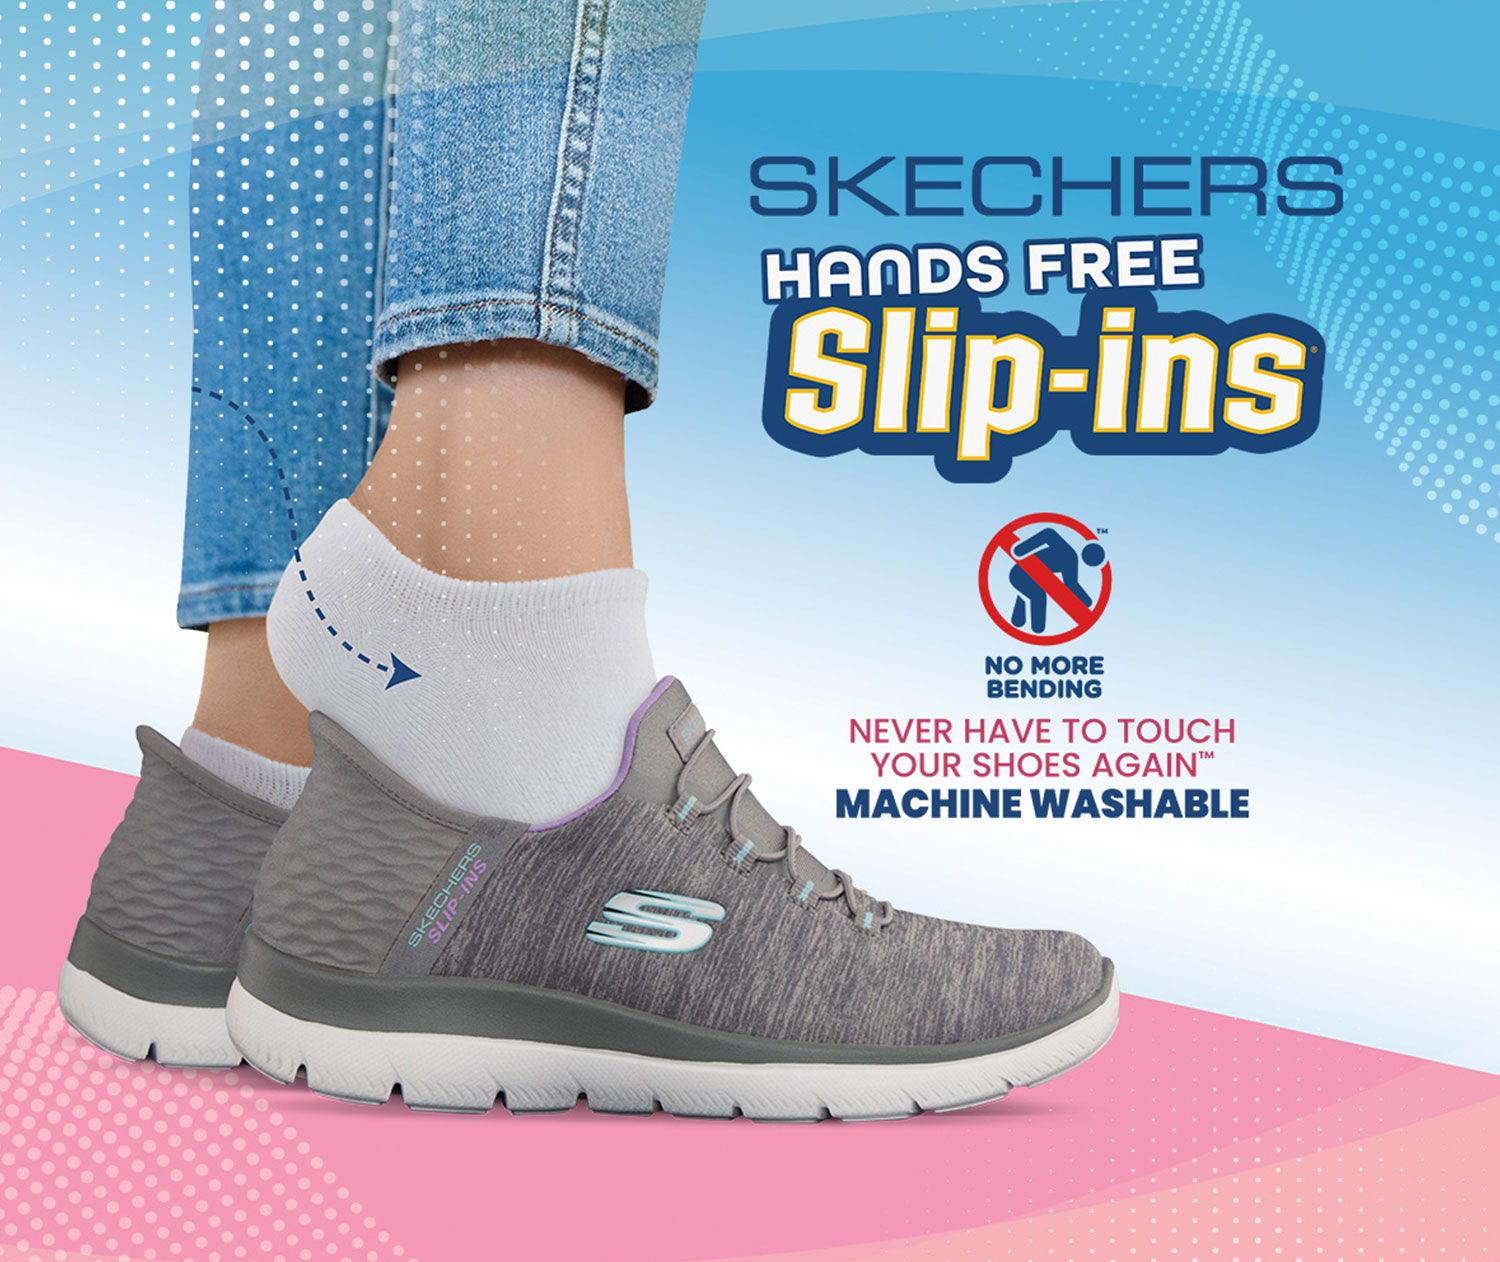 Buy Skechers Shoes Online - The Athlete's Foot